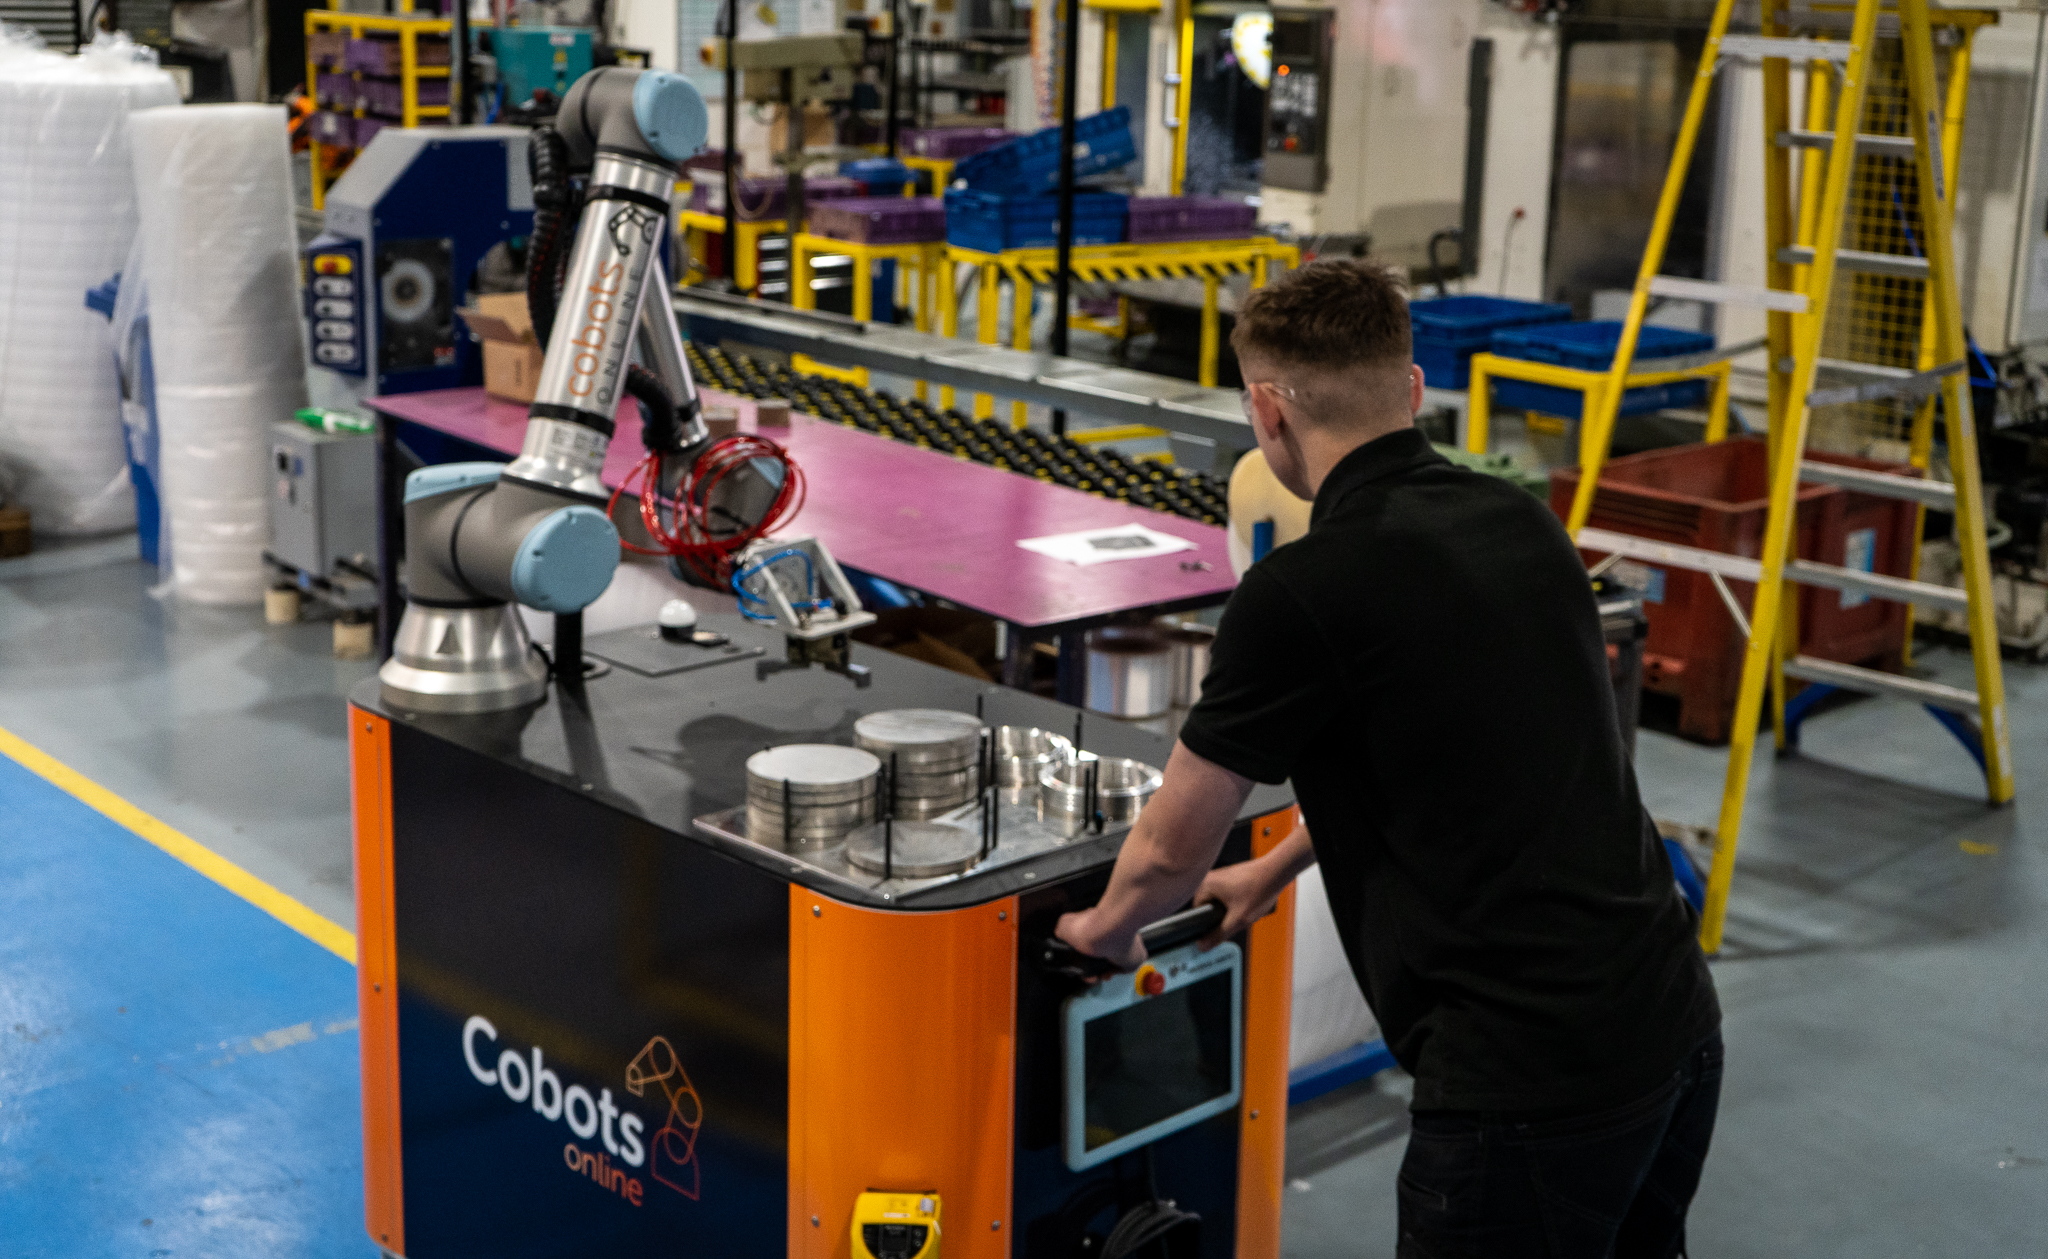 worker pushing CoboTend cobot unit on factory floor